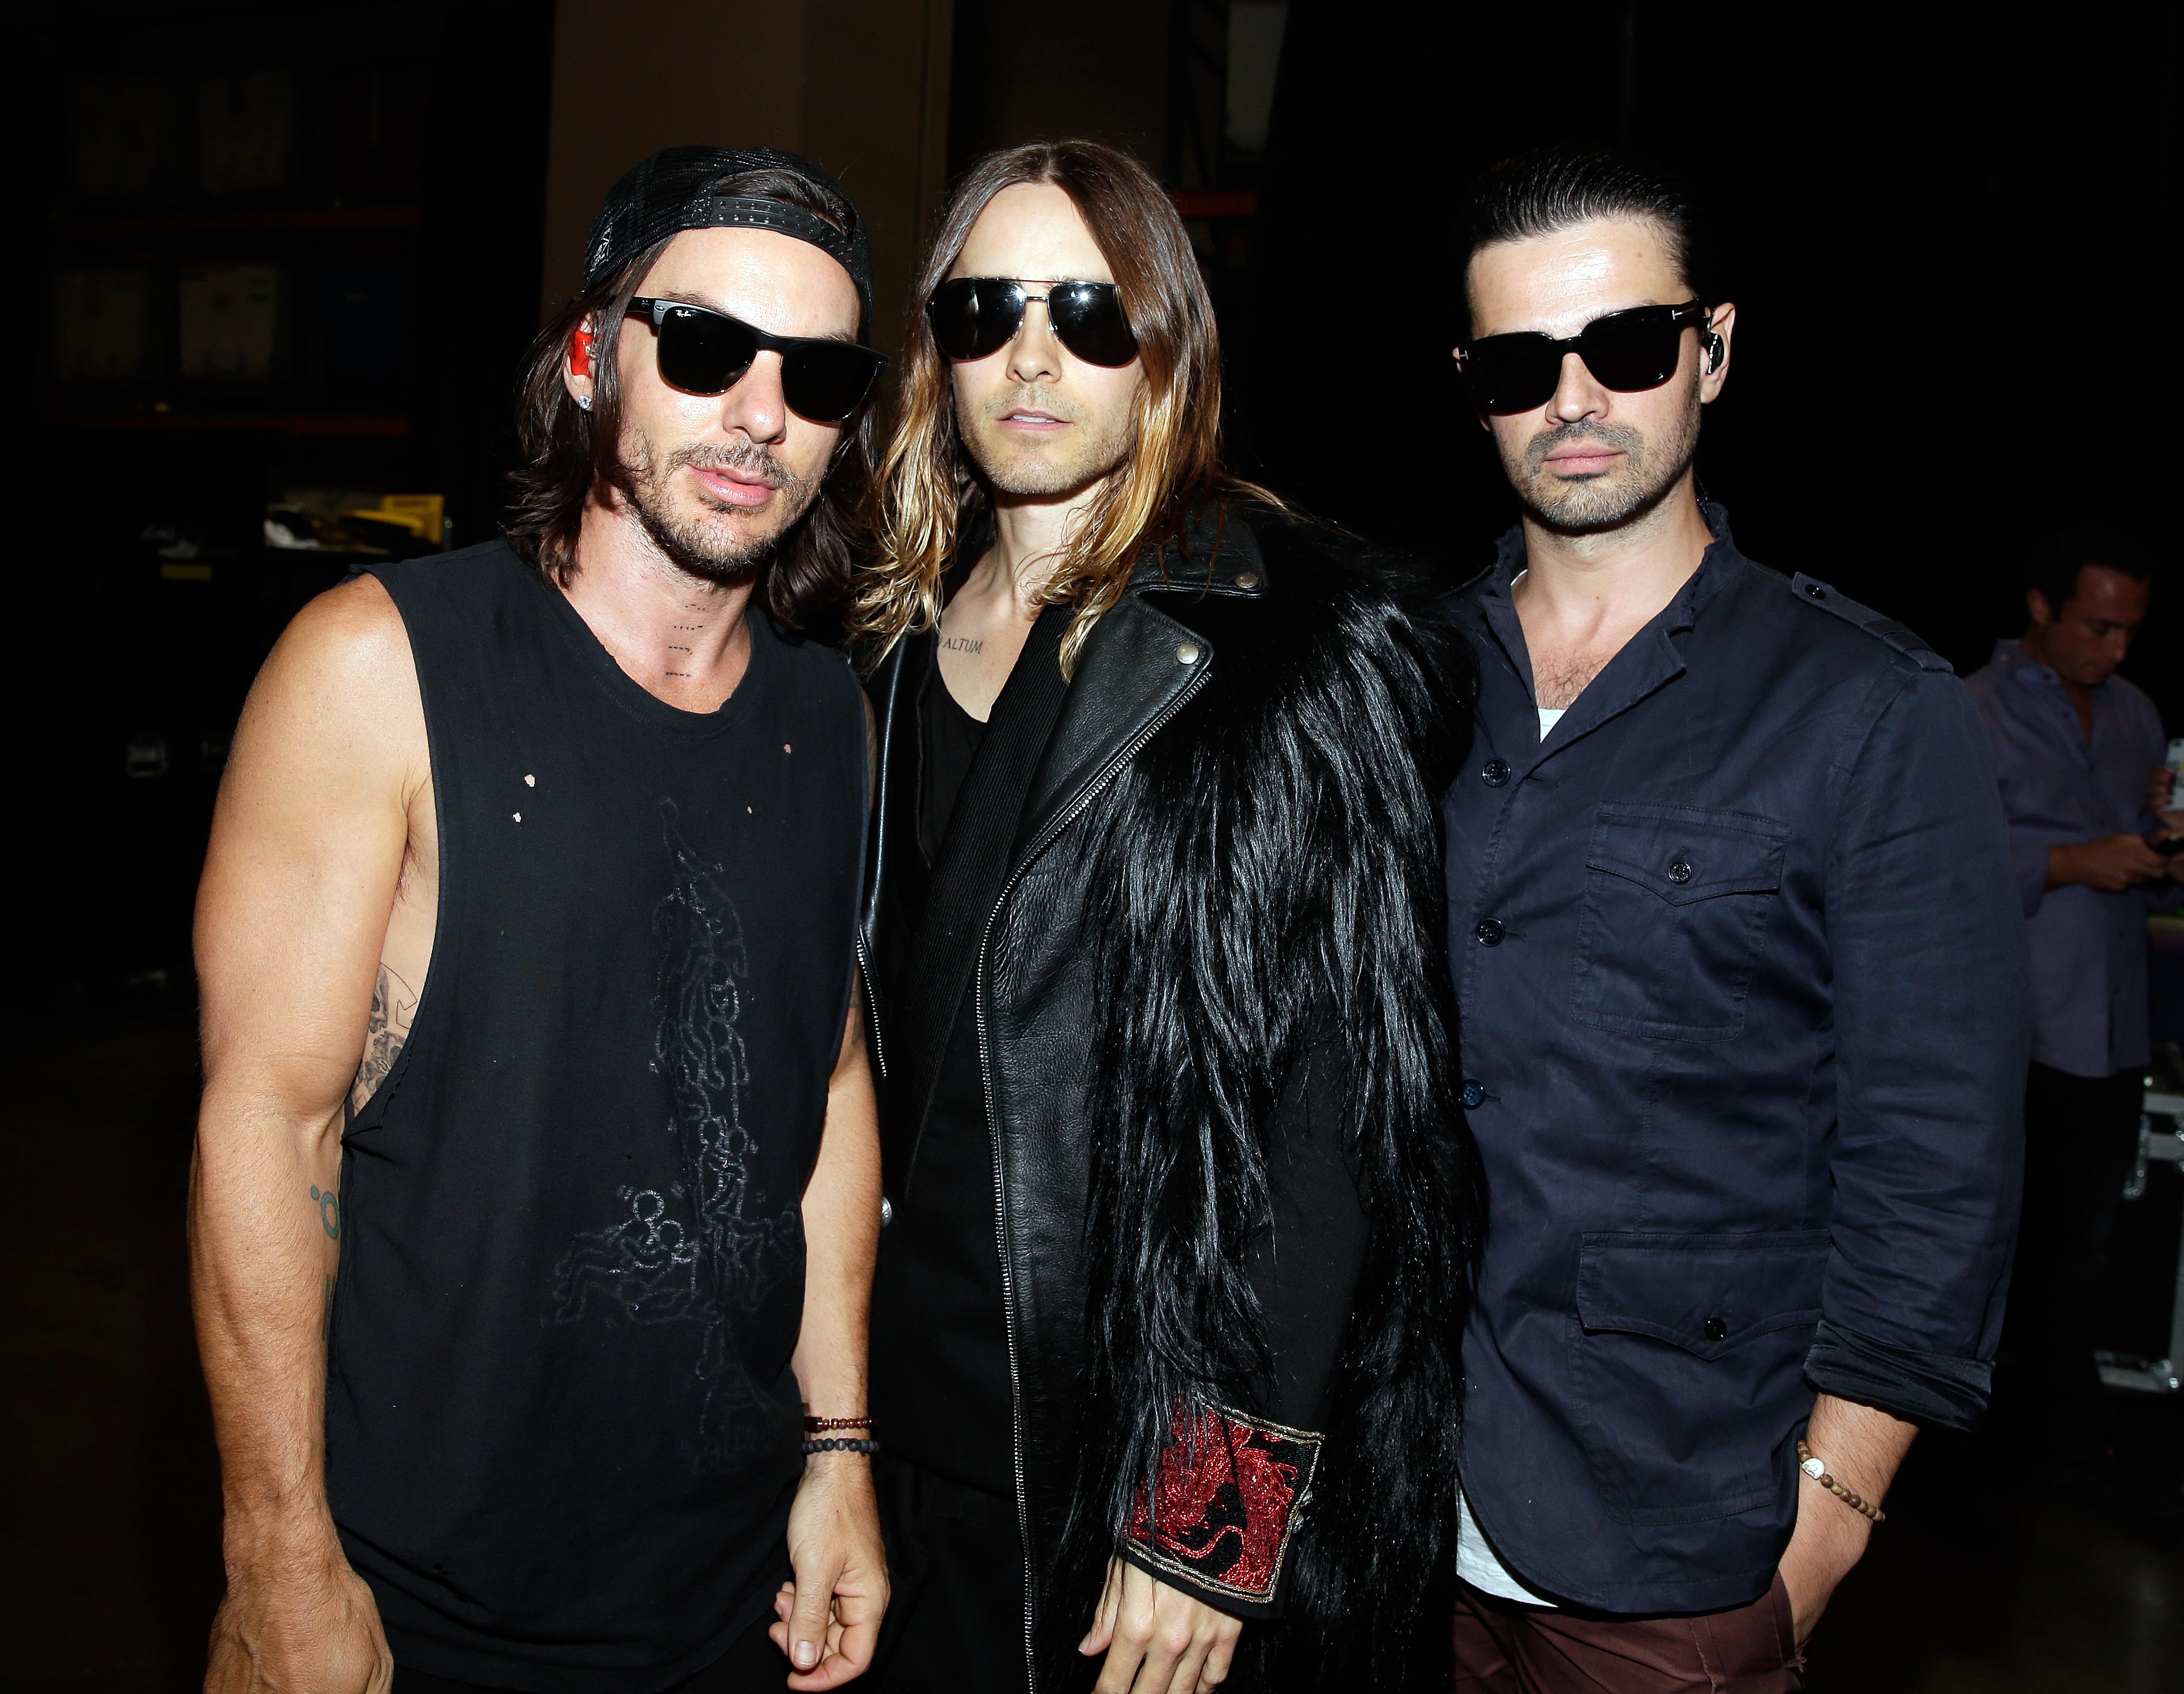 Thirty Seconds to Mars at the iHeartRadio Music Festival in 2013